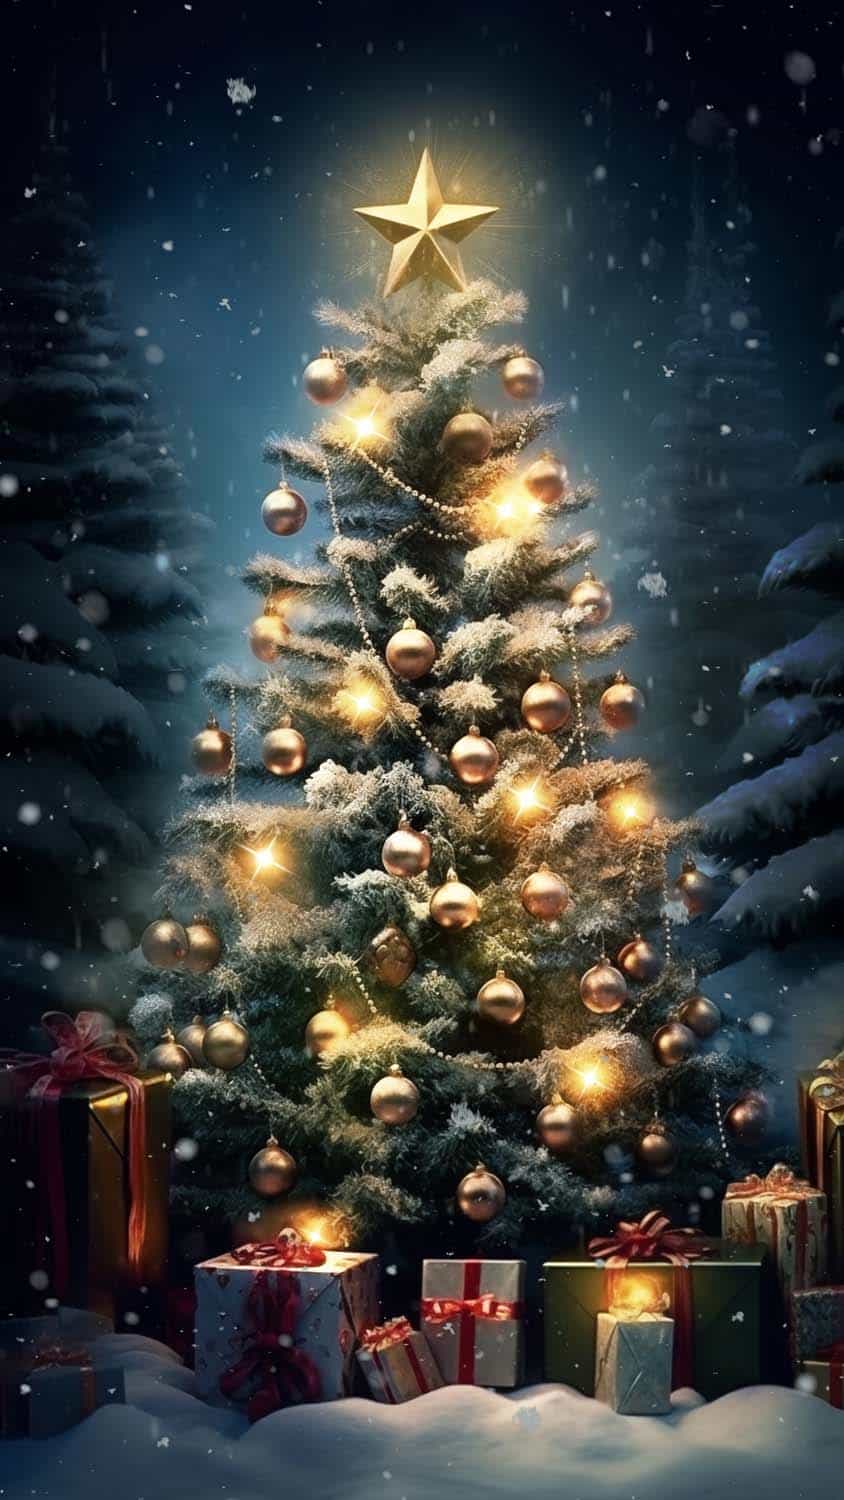 Xmas Tree and Gifts iPhone Wallpaper - iPhone Wallpapers